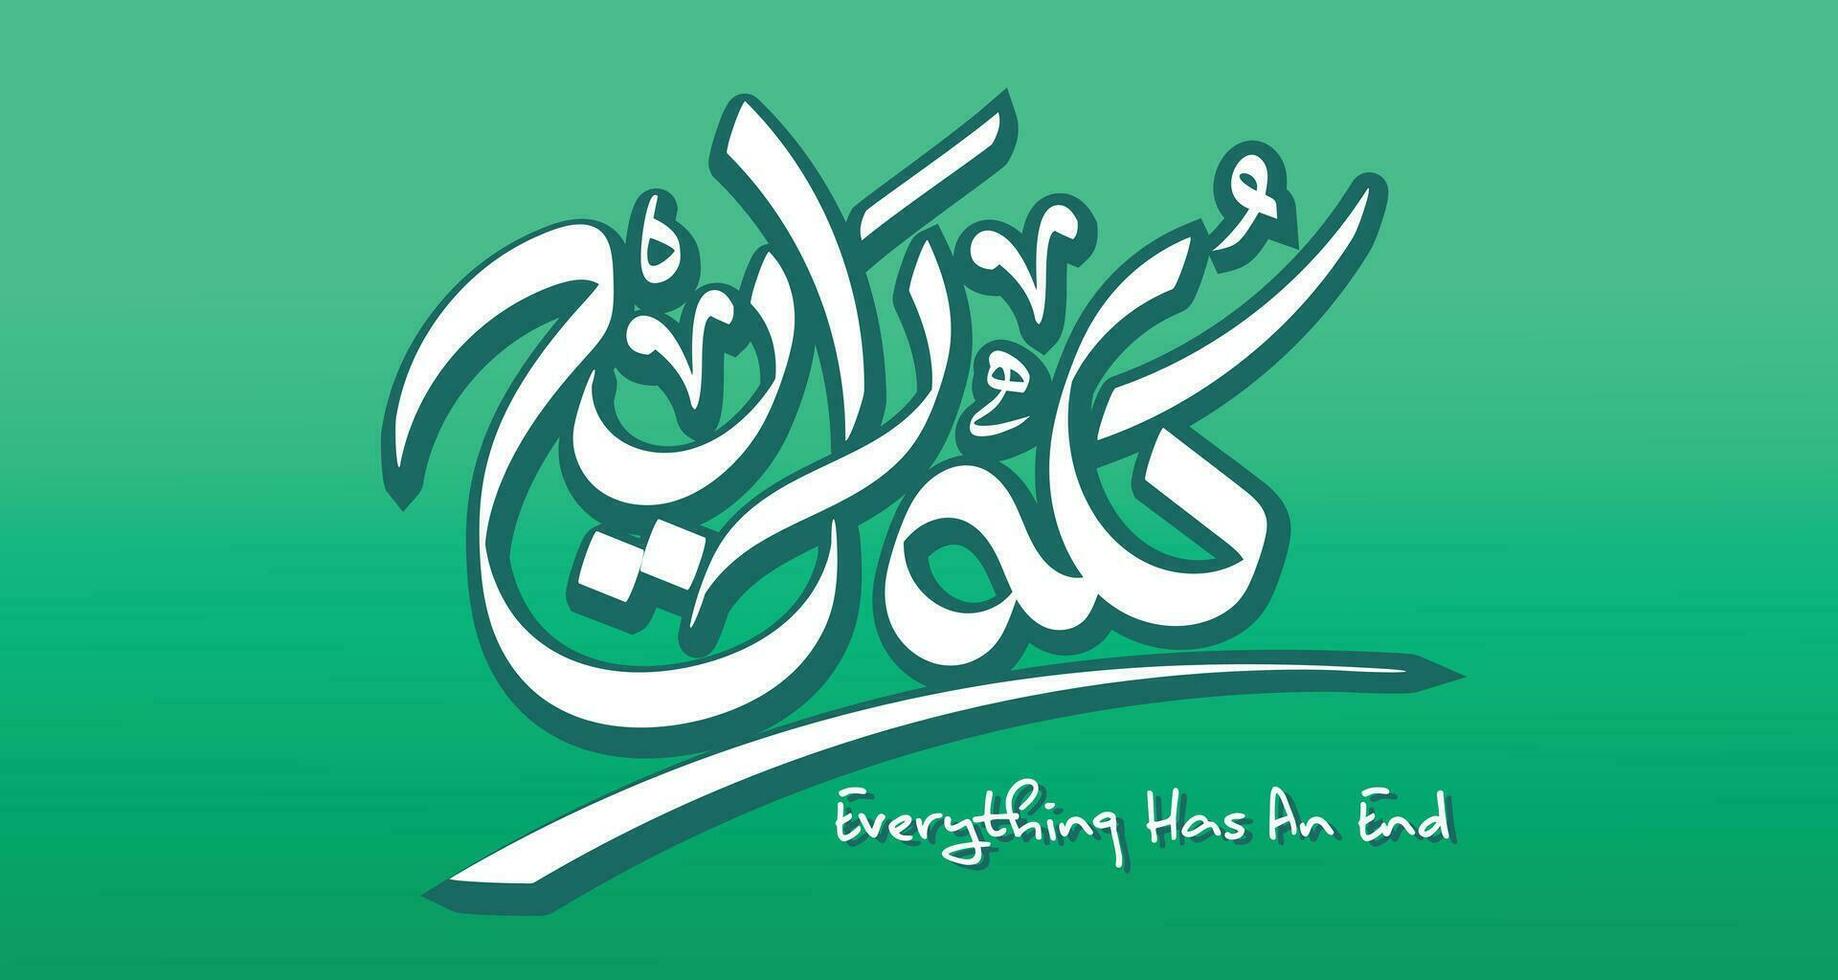 Translation Everything has an end in arabic language handwritten calligraphy font vector art